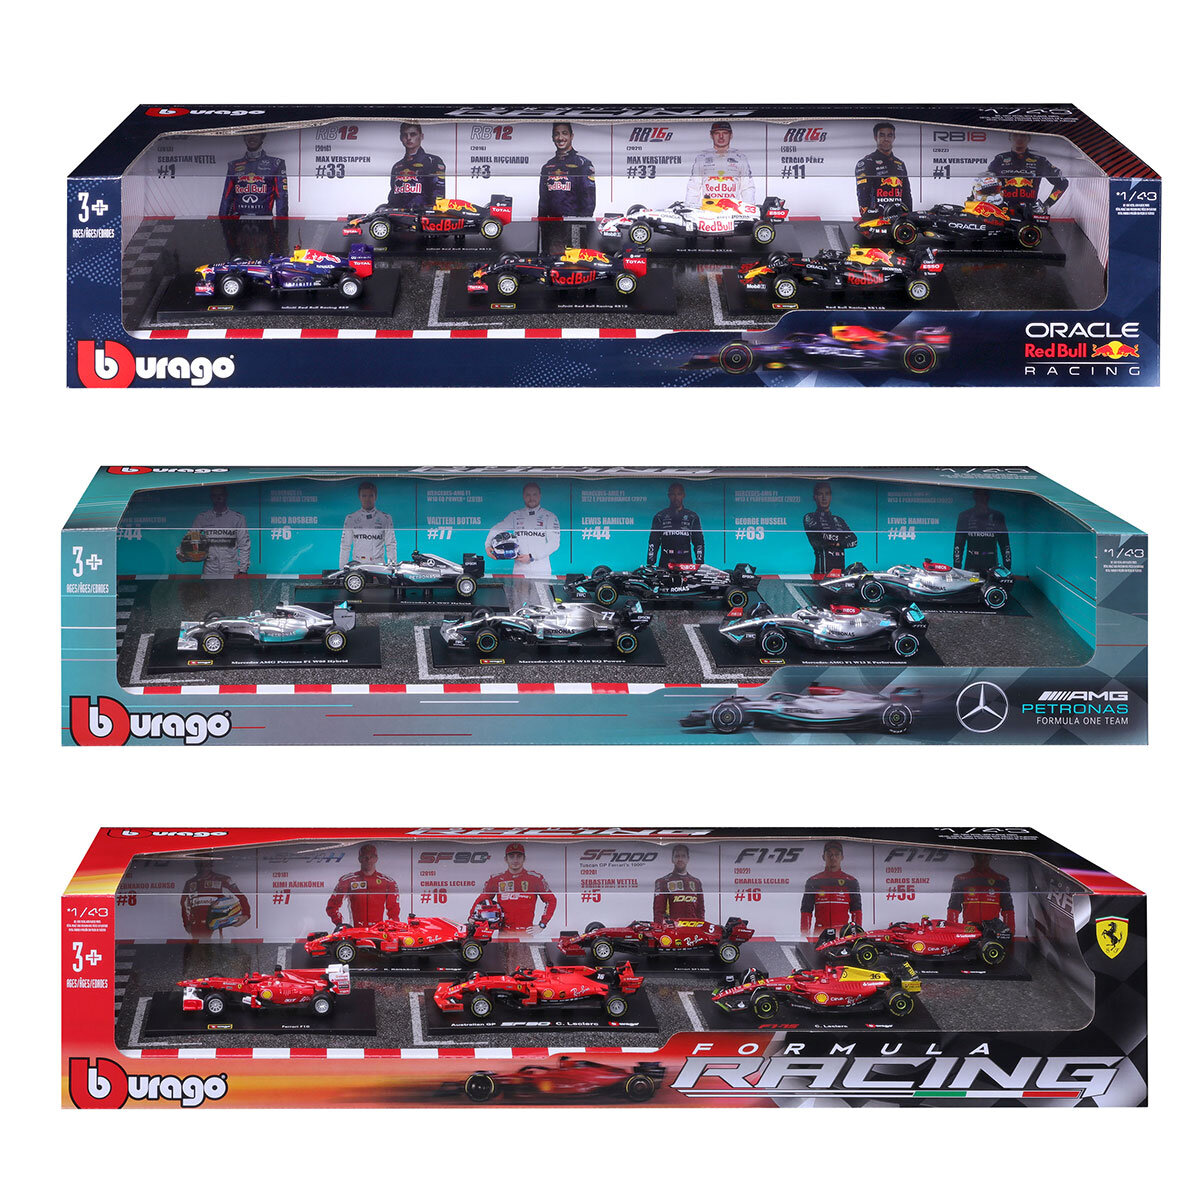 Have anyone seen the Bburago F1 models in Costco, that comes in a 6 pack?  Seems they are selling out fast. There are Ferrari ans Red Bull versions,  possibly Mercedes as well.